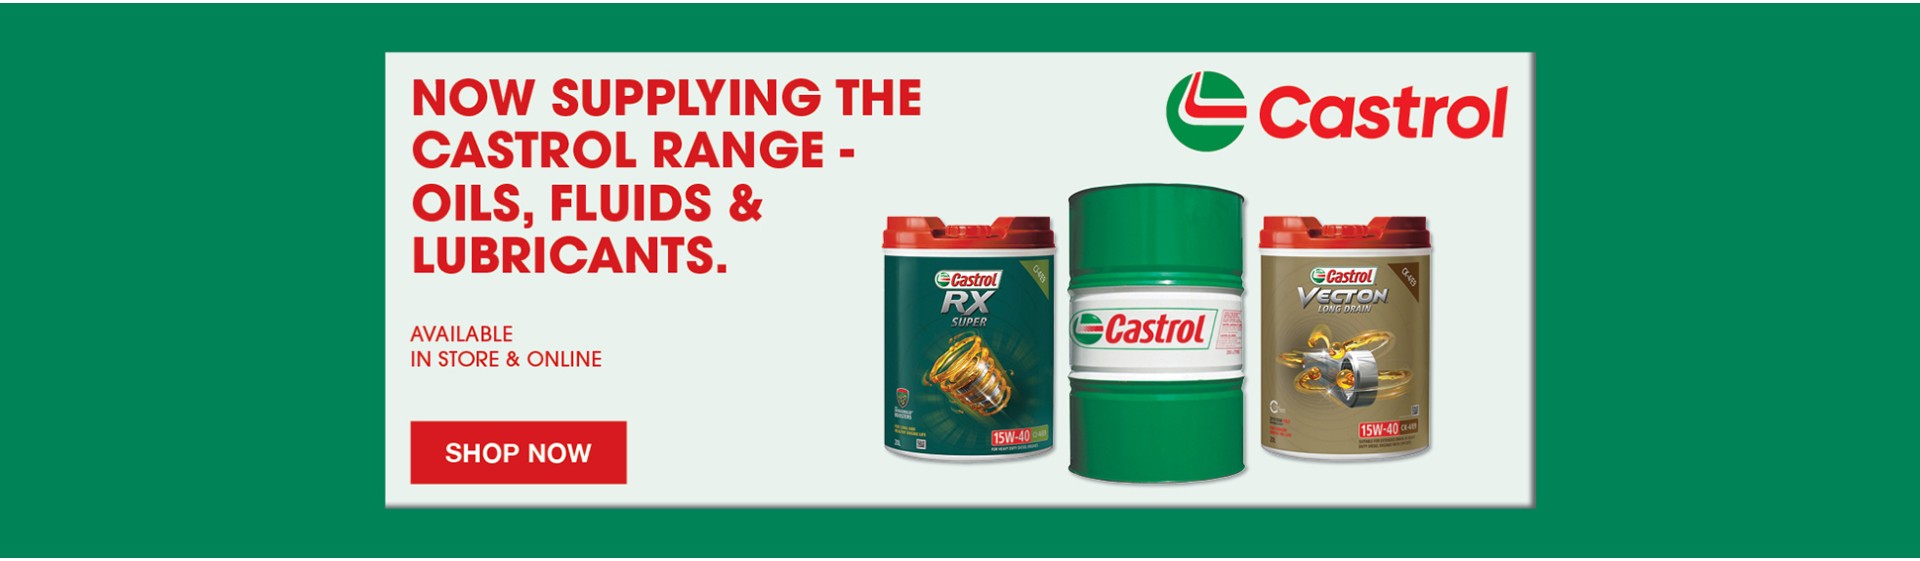 Castrol Truck Oil-Lubricant-Fluid-Grease